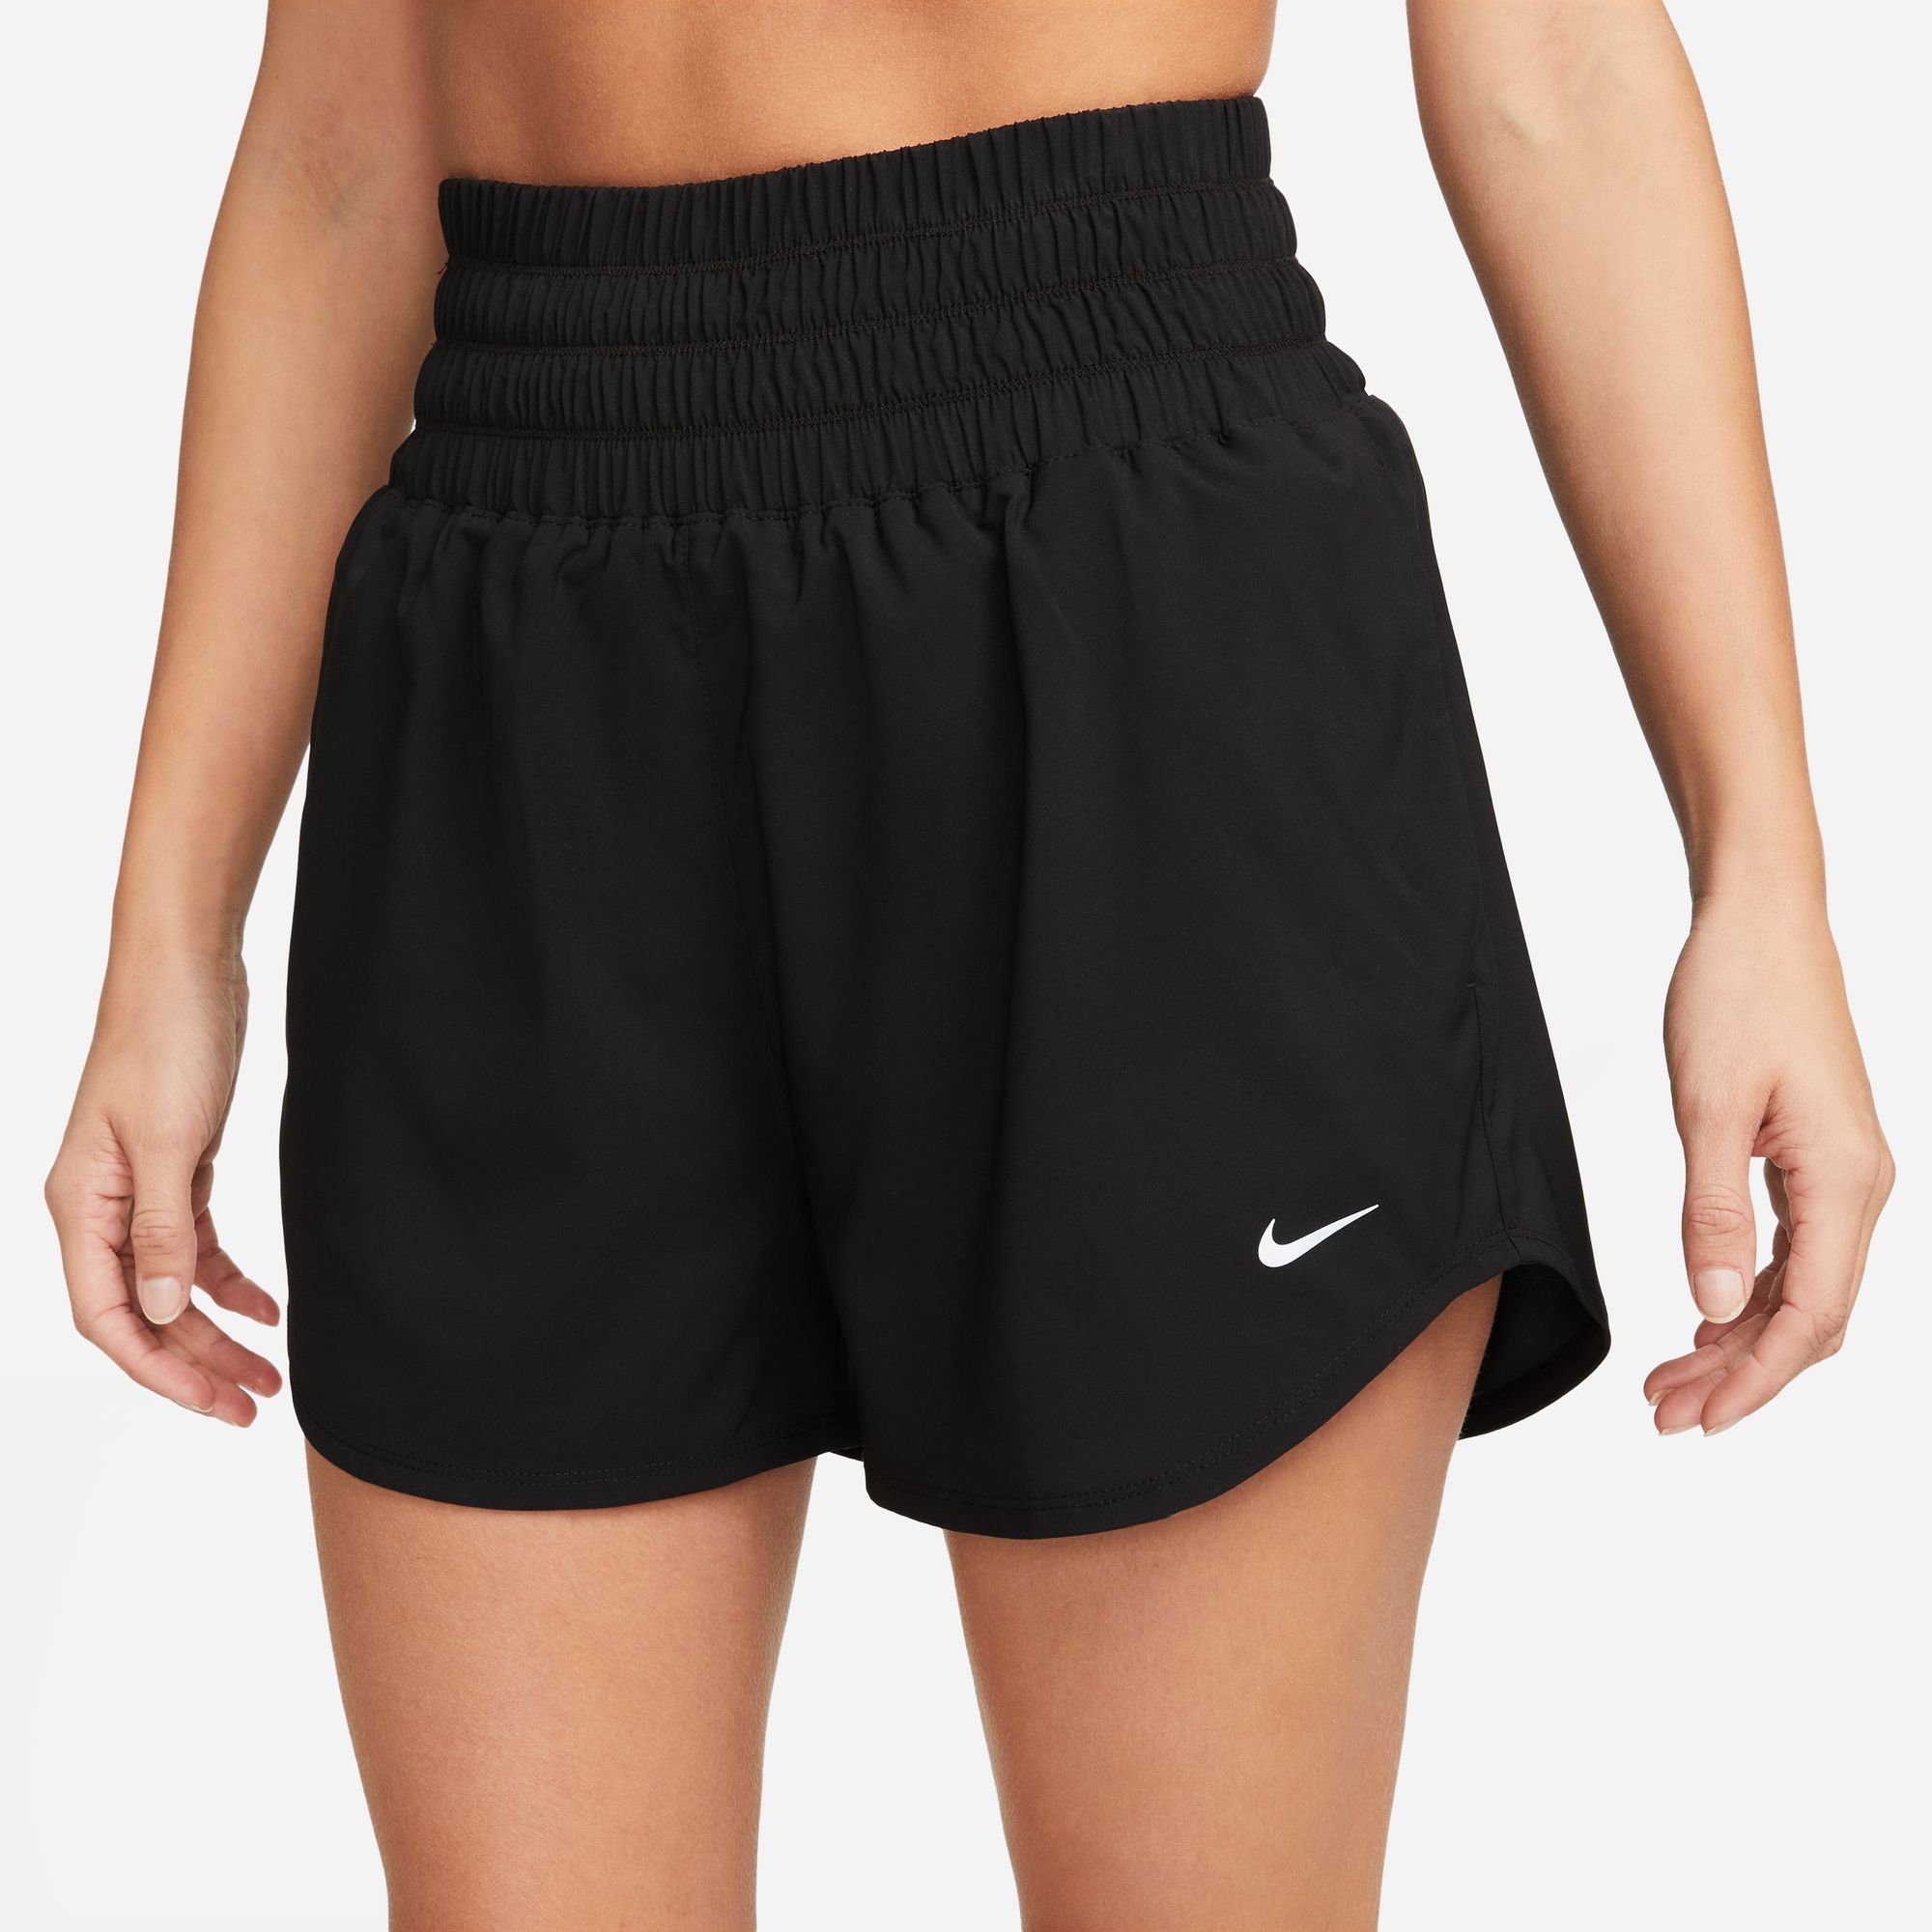 HIGH-WAISTED DRI-FIT ONE WOMEN'S SHORTS BRIEF-LINED ULTRA Trainingsshorts Nike